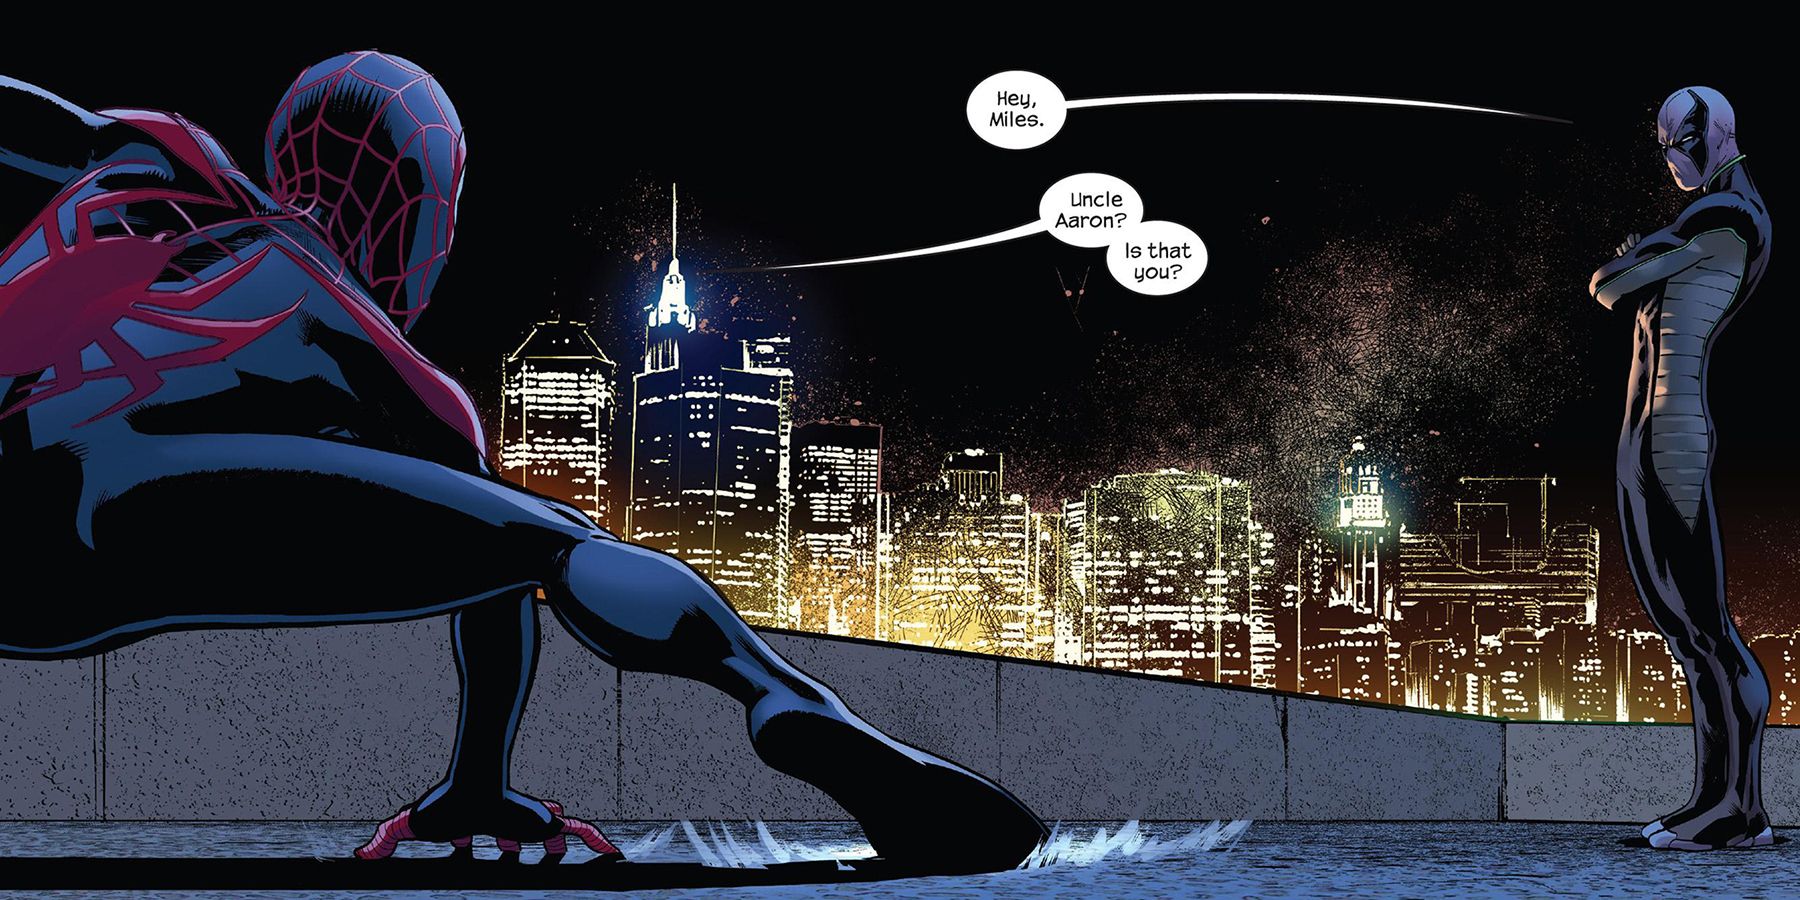 Miles Morales confronts his Uncle Aaron Davis AKA The Prowler.